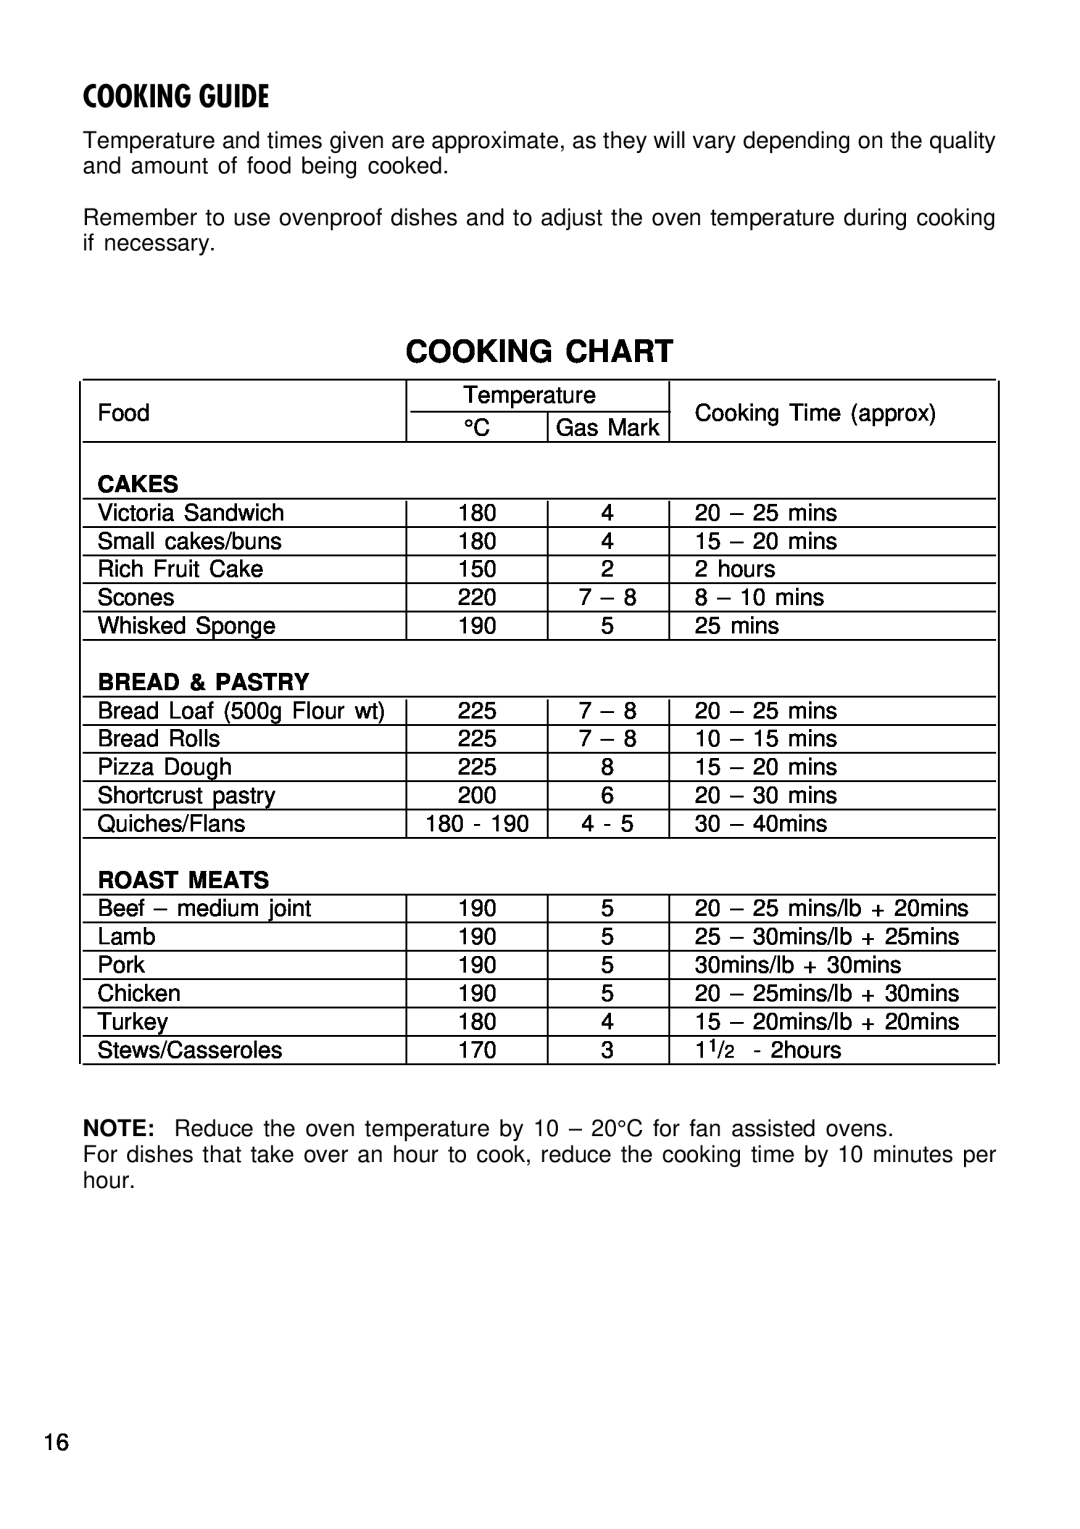 Kenwood CK 740 manual Cooking Guide, Cooking Chart, Cakes, Bread & Pastry, Roast Meats 